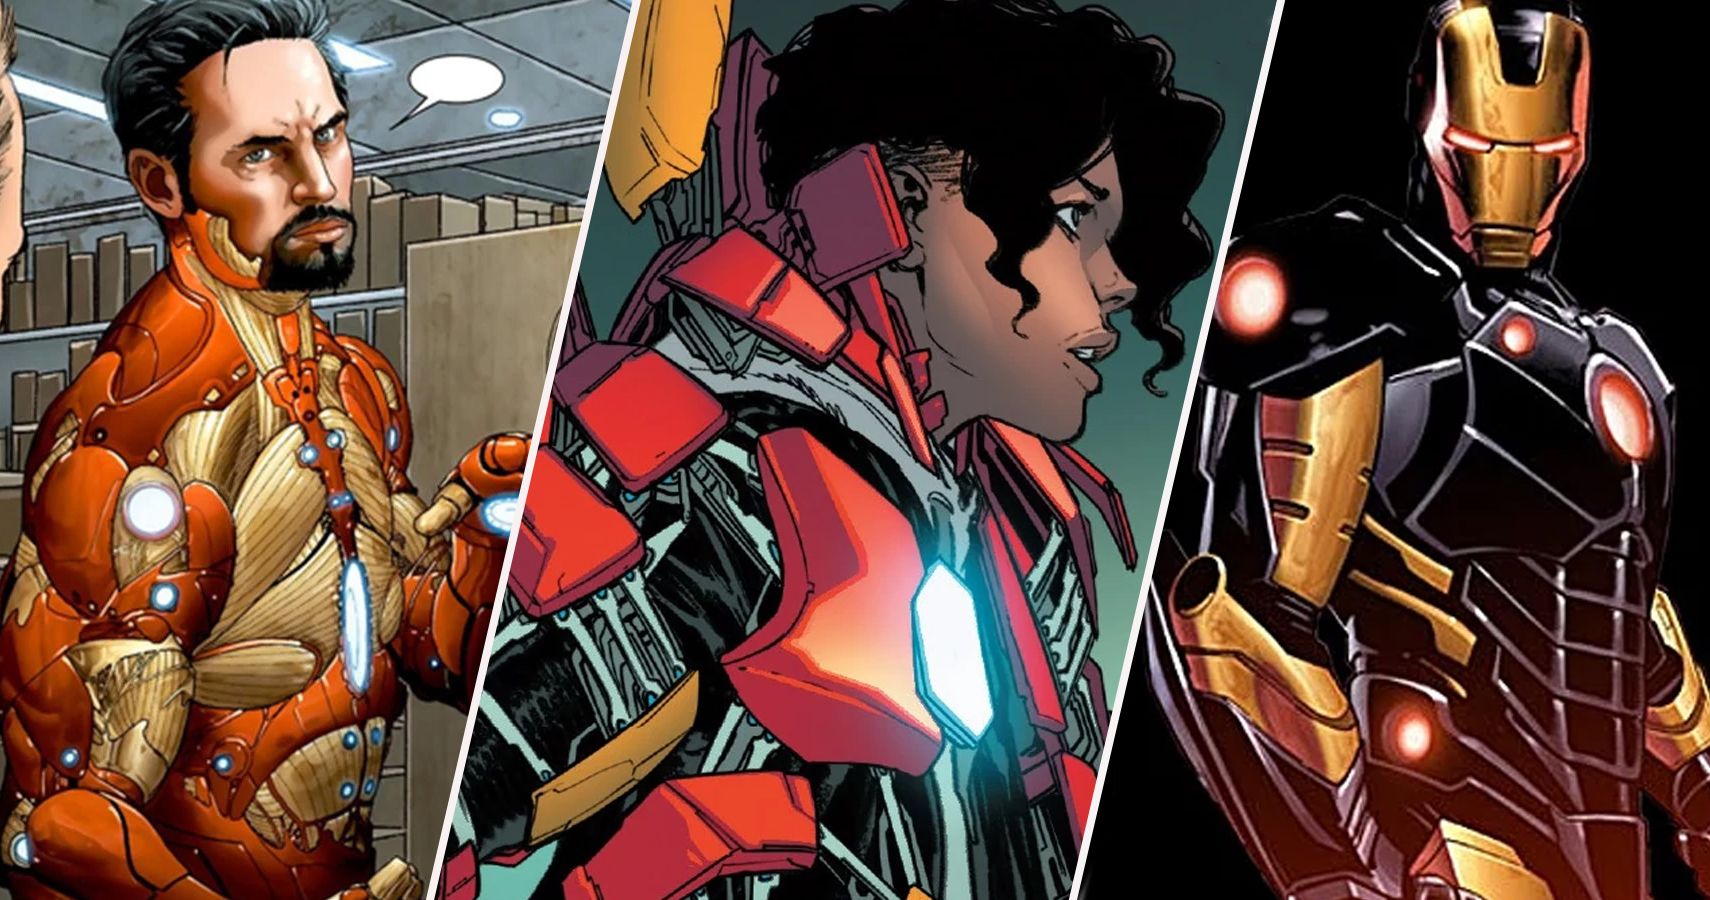 15 Iron Man Armors Ranked Worst To Best (And 5 Who Wore 